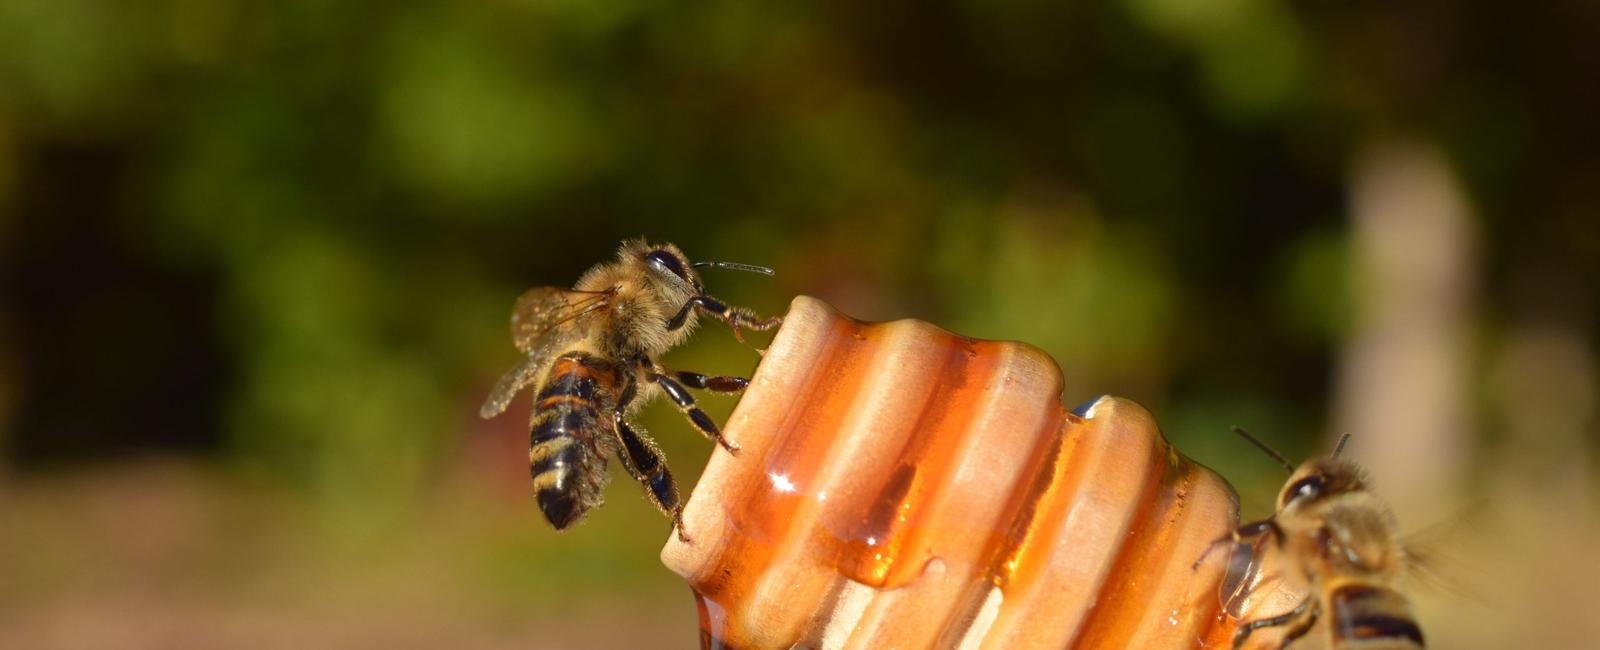 Honey is made from nectar and bee vomit